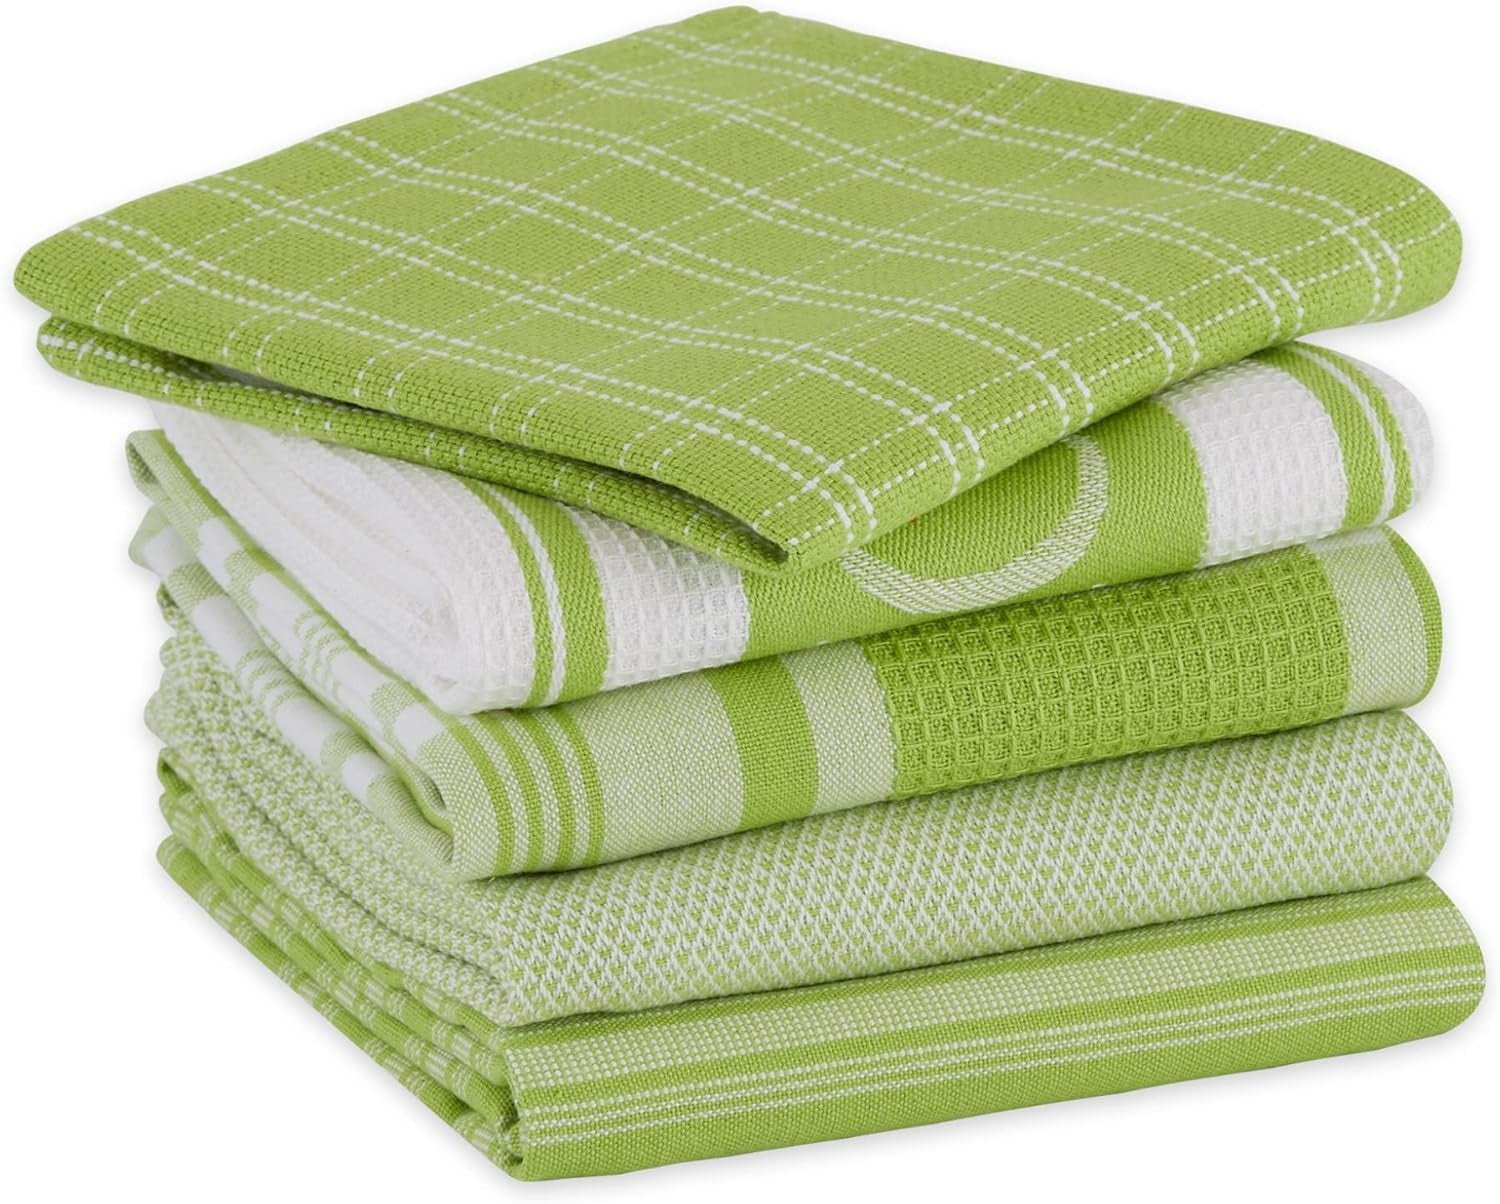 Everyday Collection Foodie Kitchen Set, Dishtowel & Dishcloth, Lime, 5 Piece